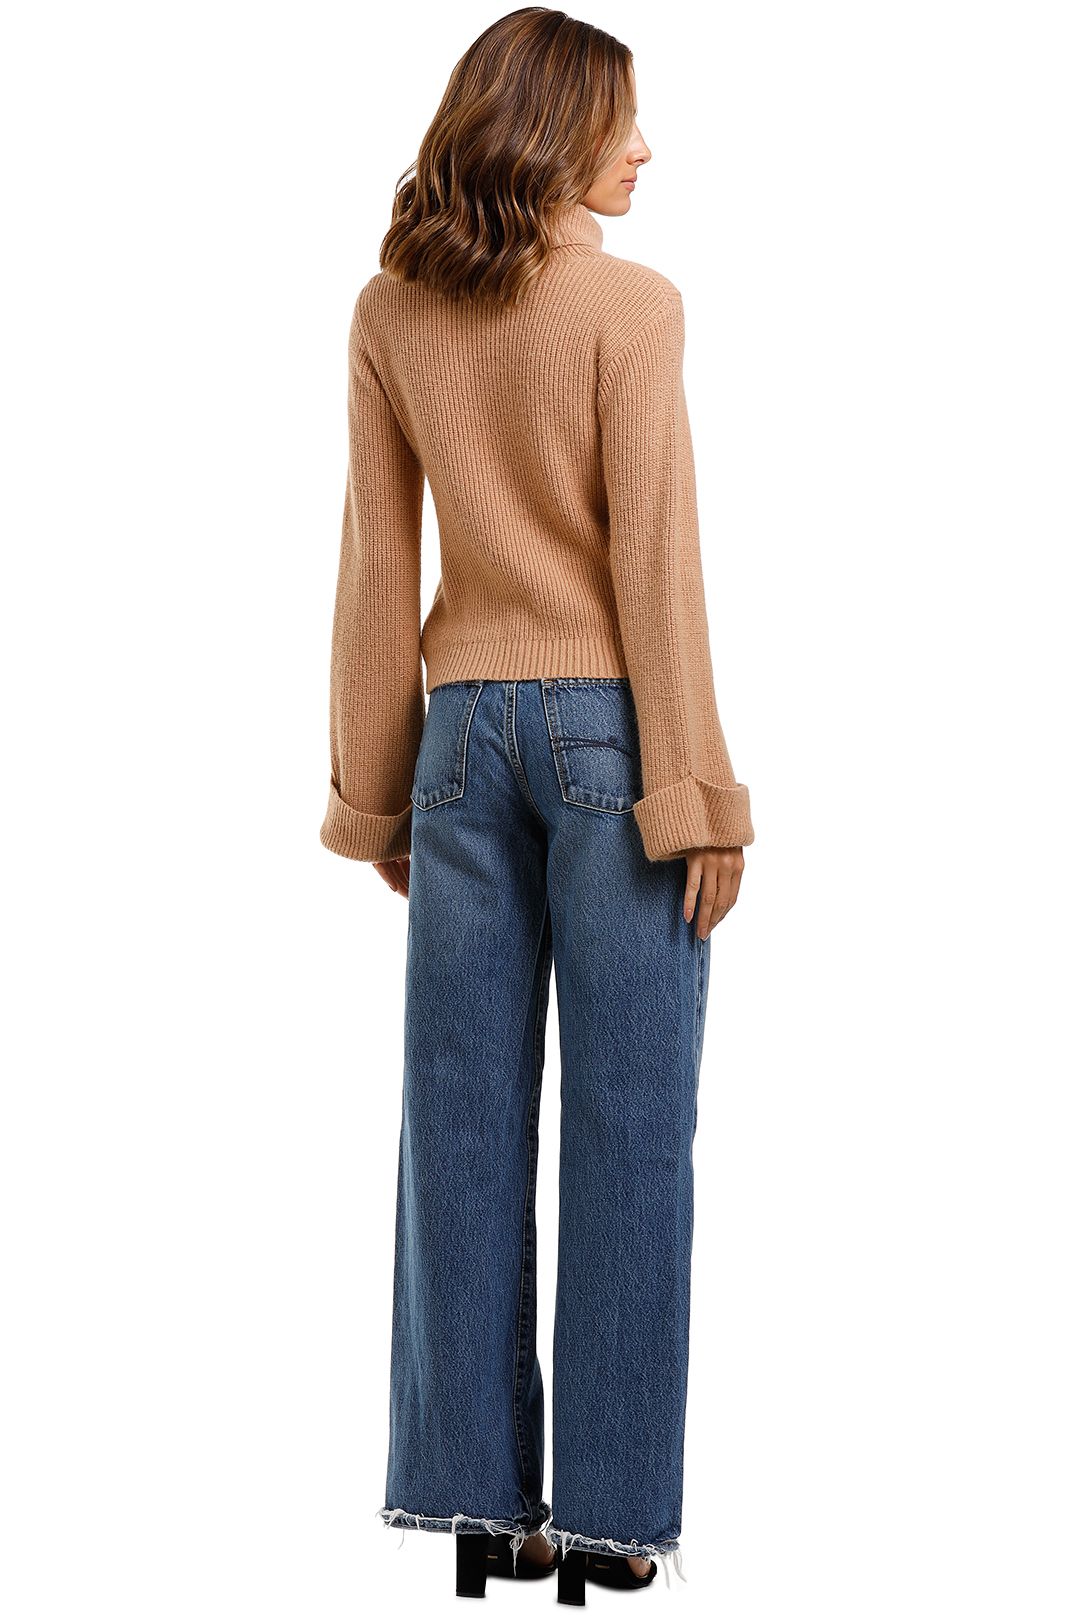 Staple The Label Ribbed Roll Neck Fawn Knit